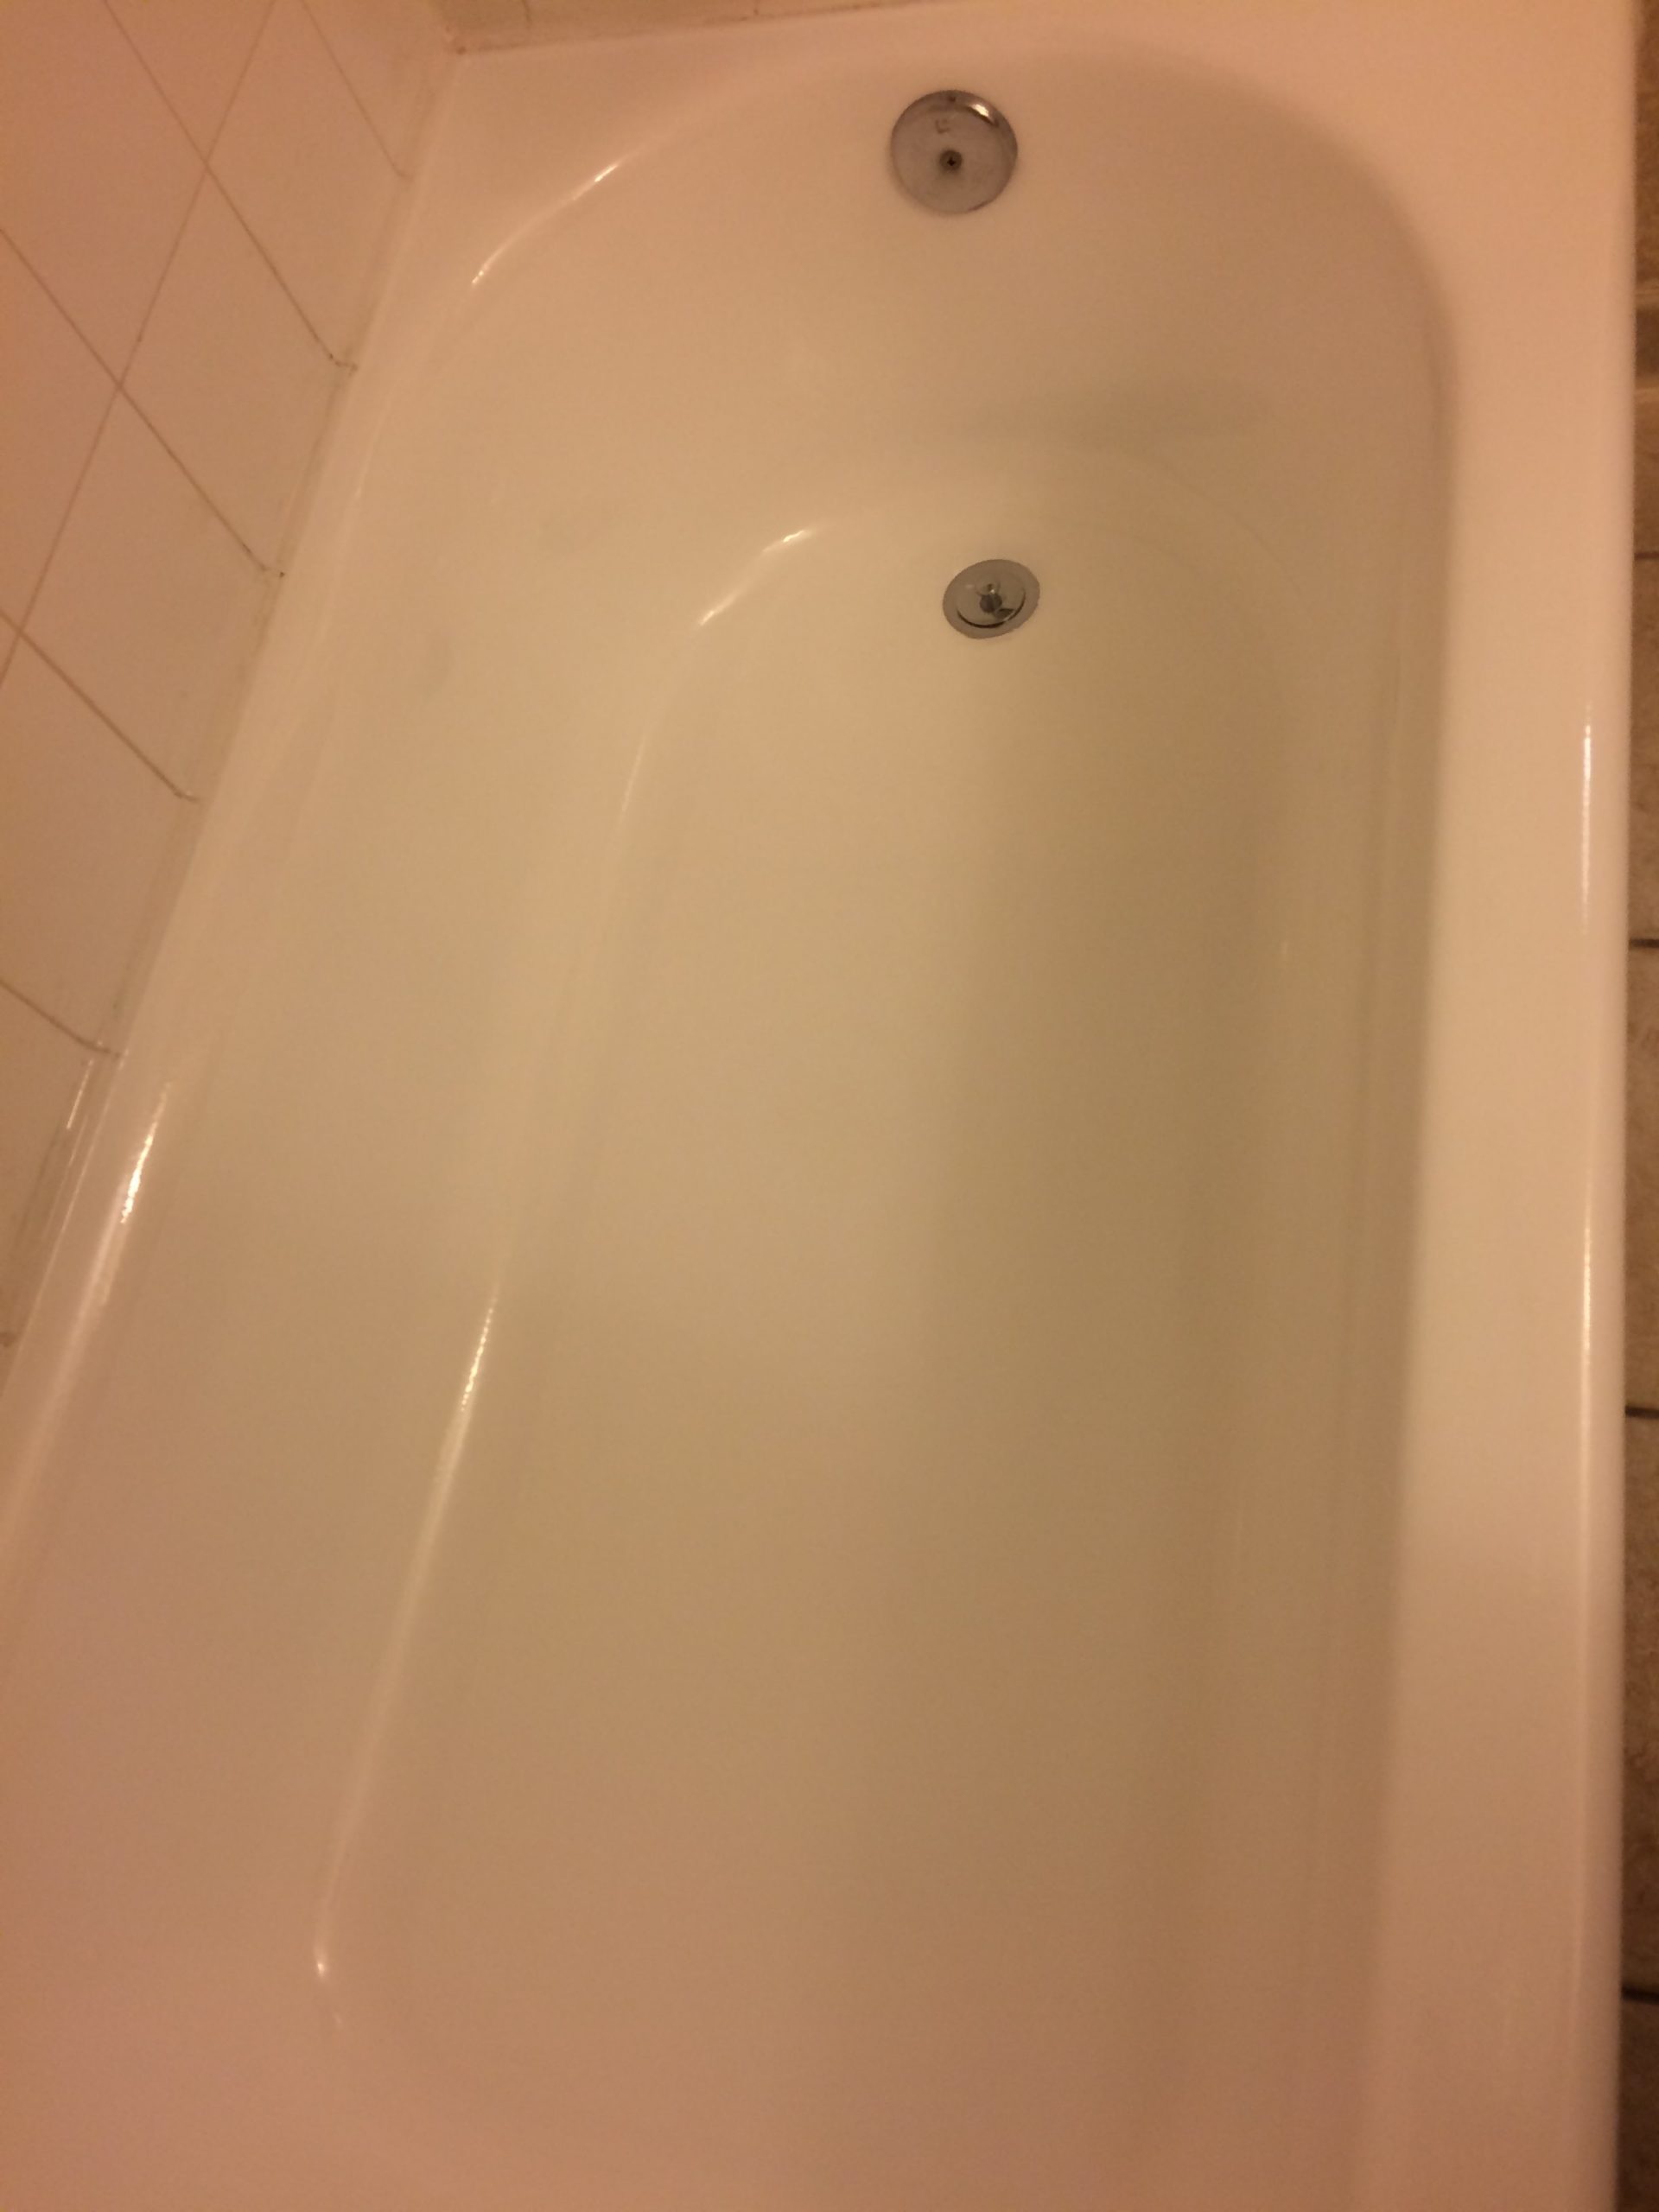 Hilton after- tub with new coating